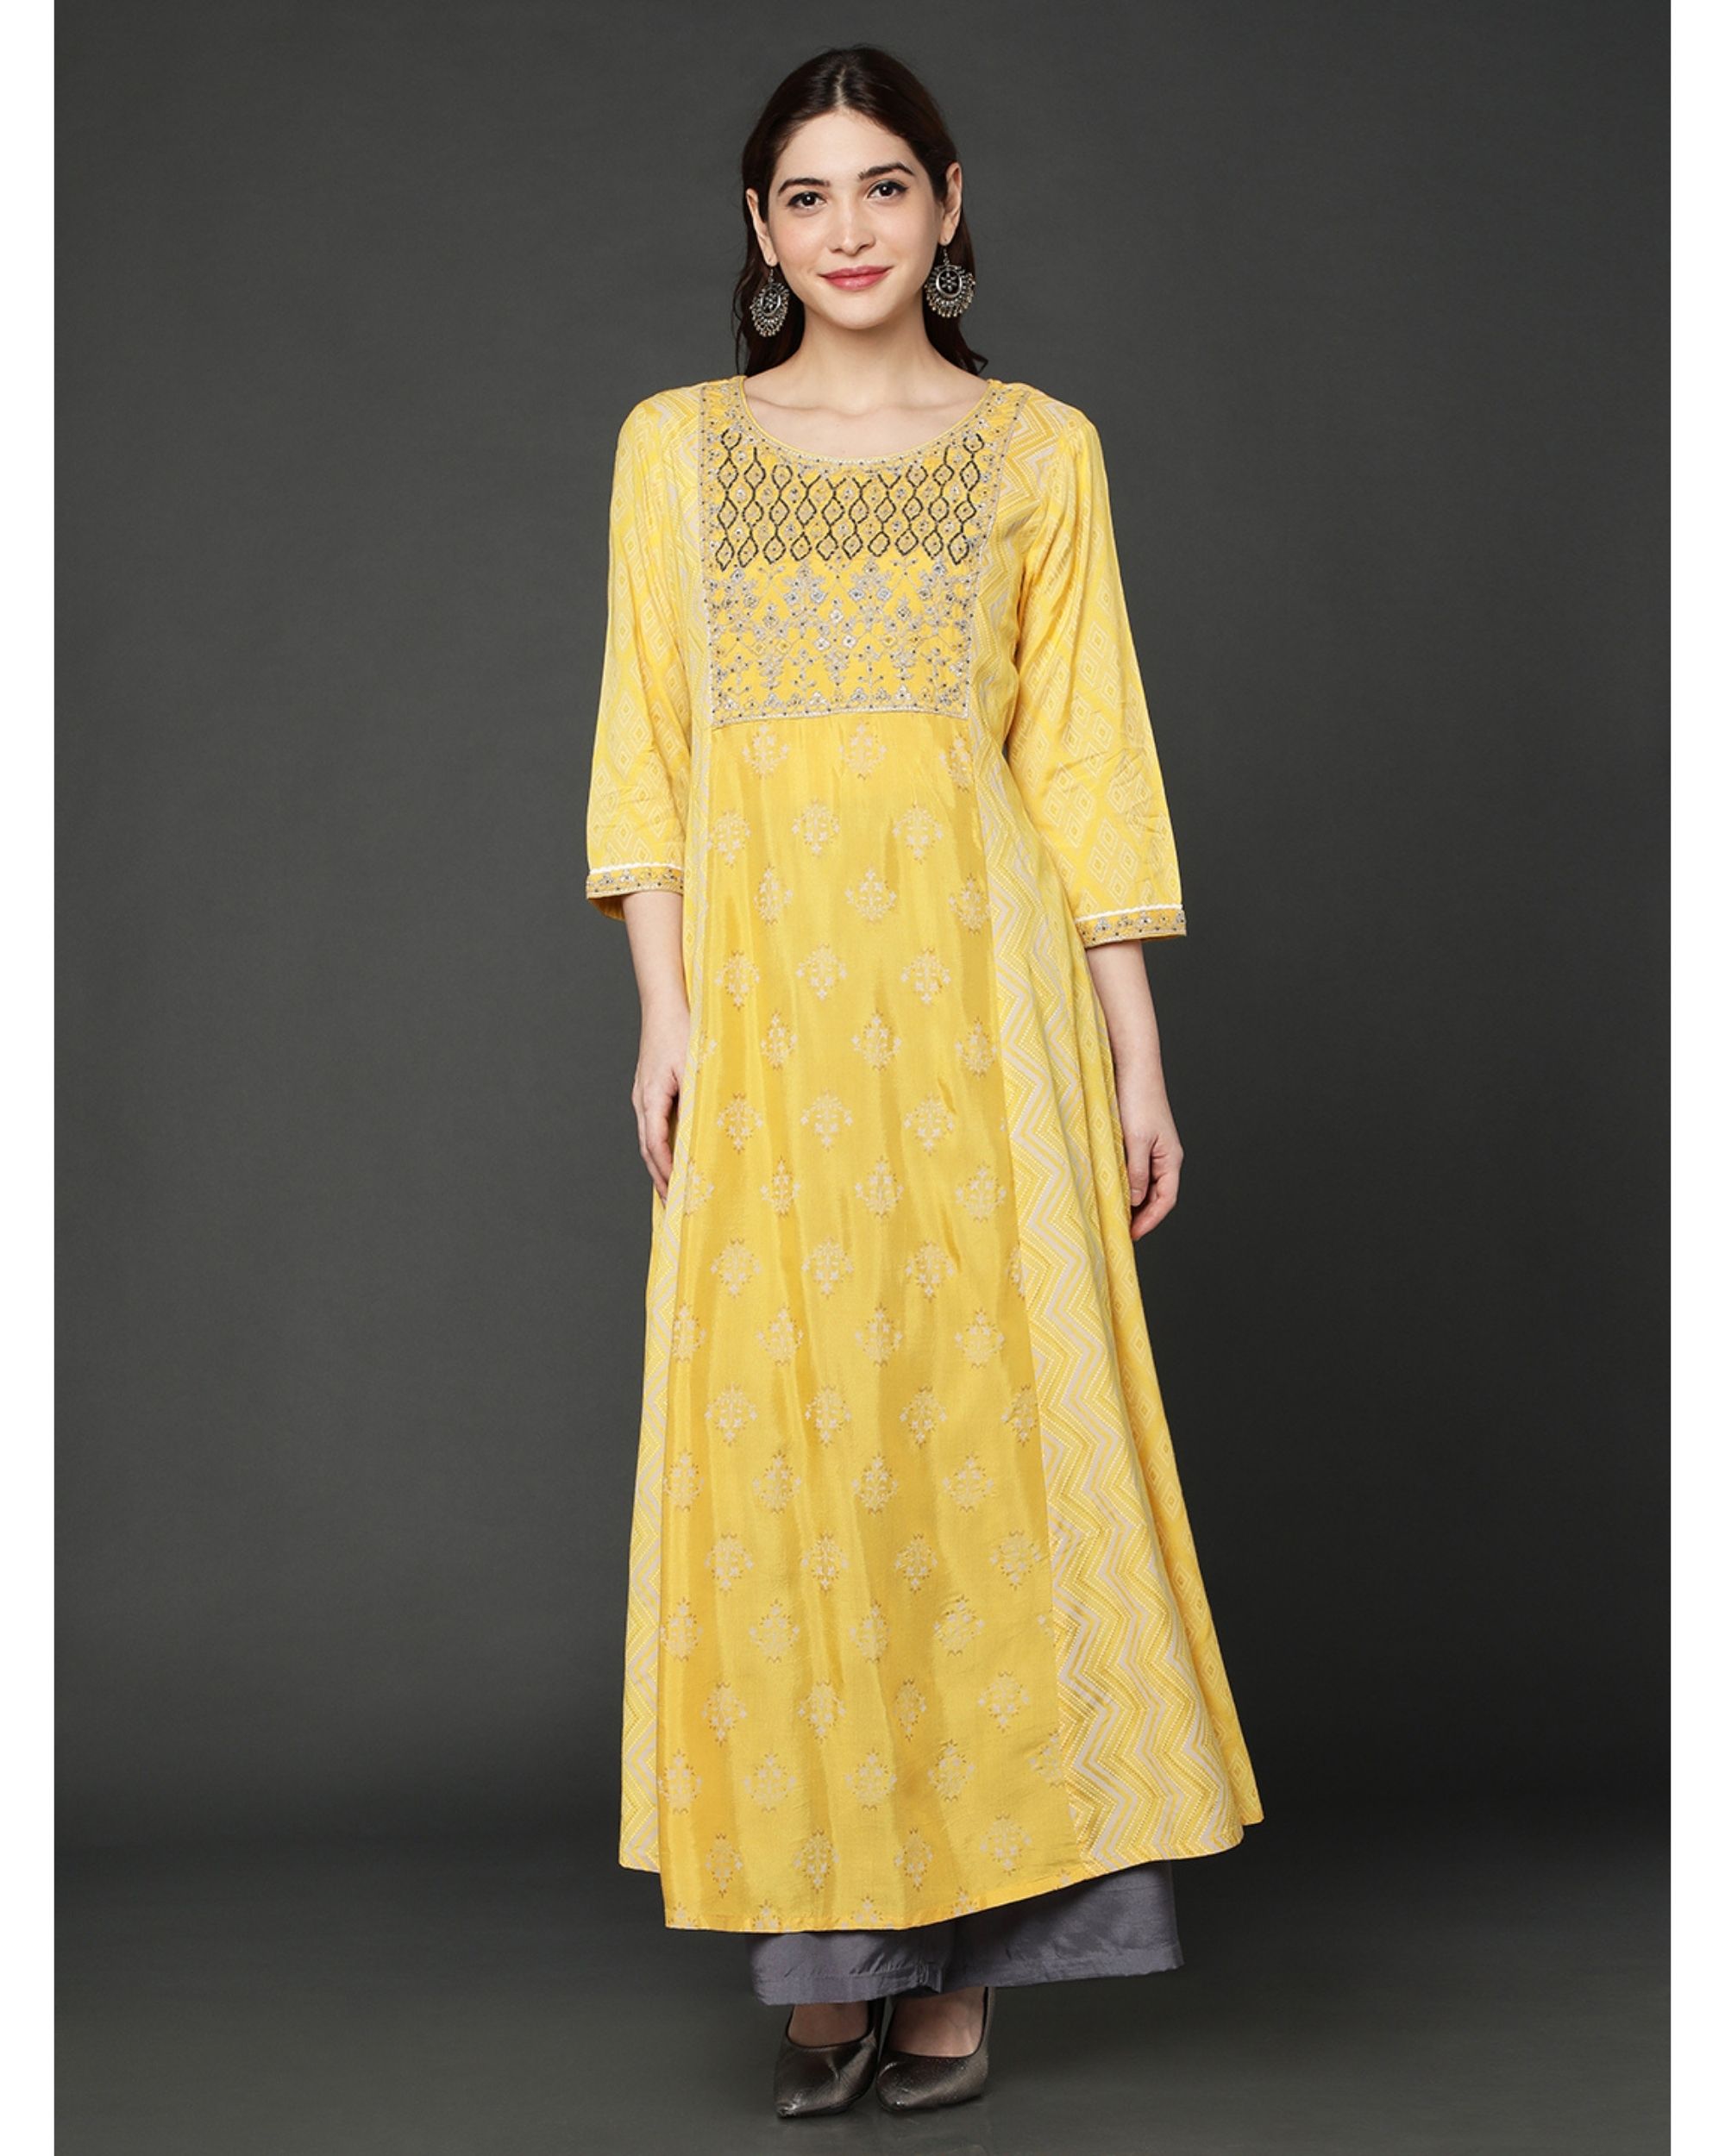 Yellow embroidered santoon dress by Ojas Designs | The Secret Label